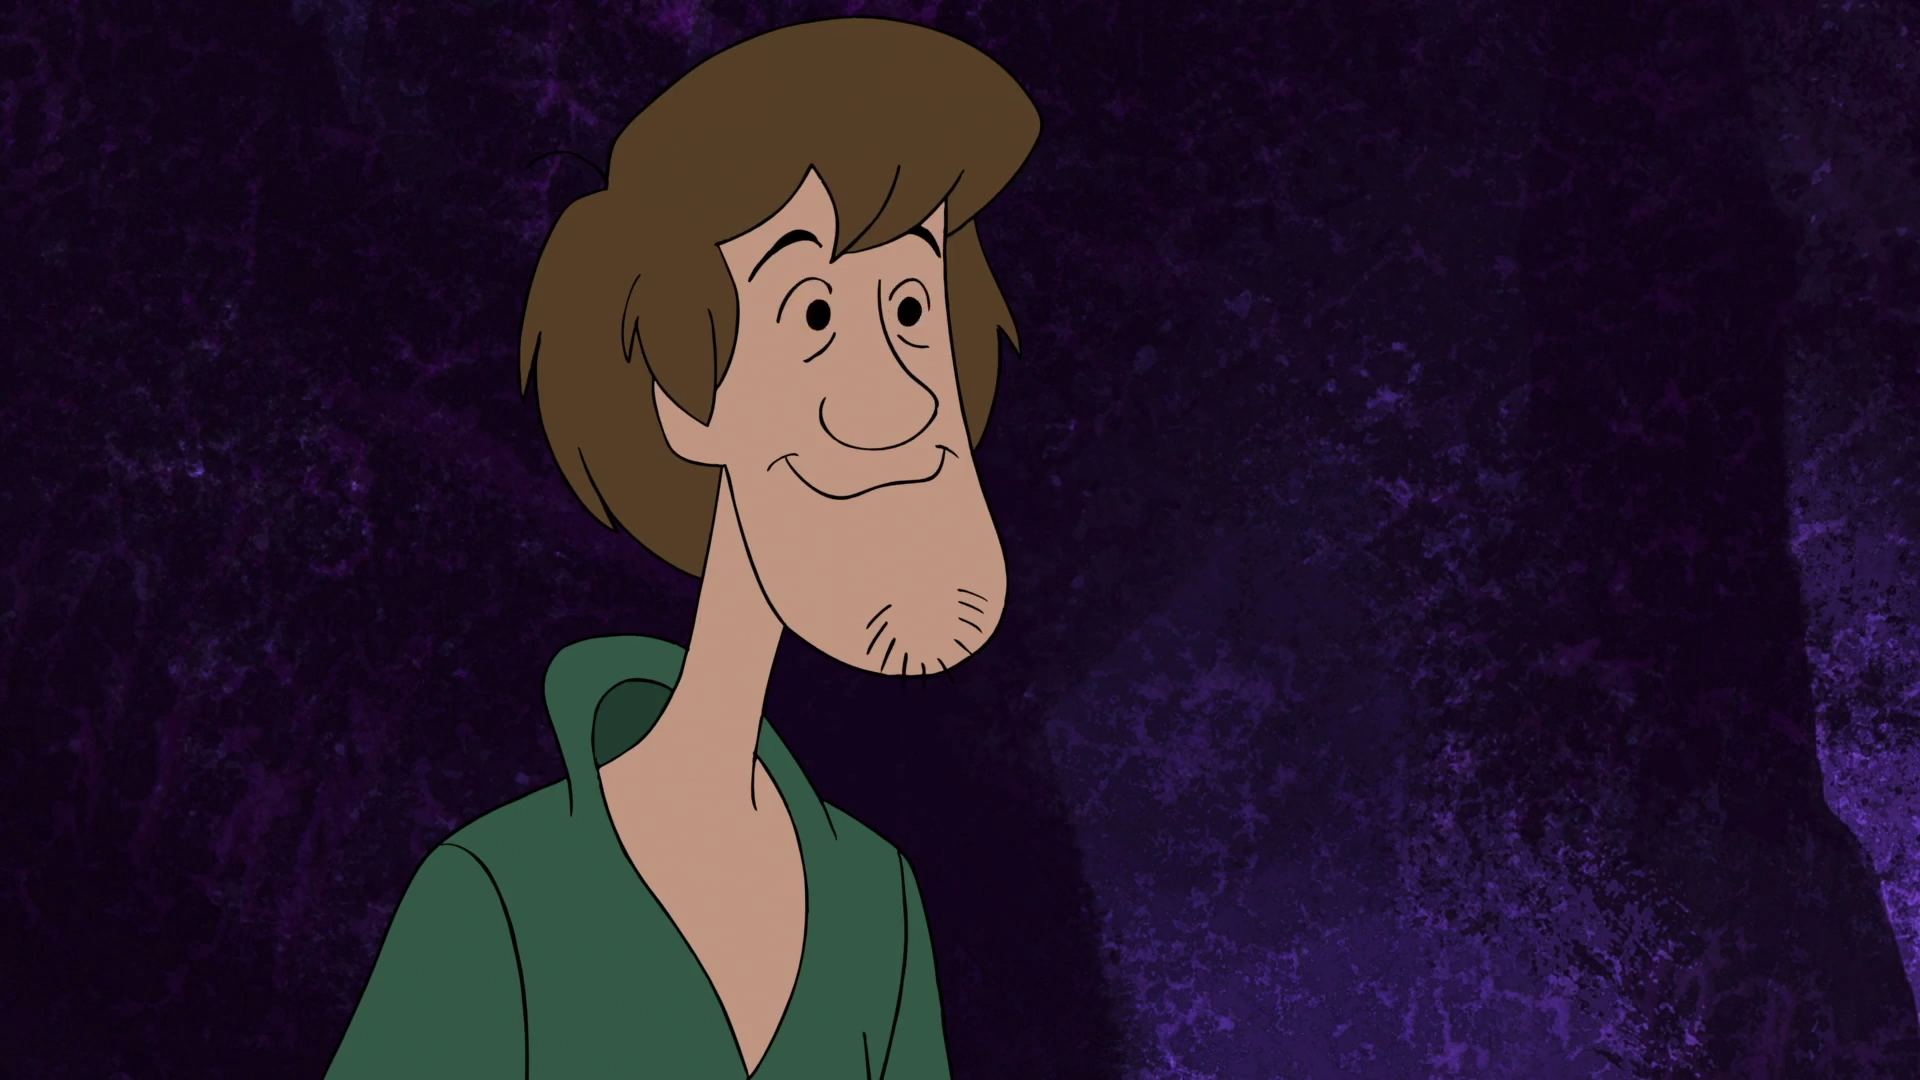 Scooby-Doo And Guess Who Wallpapers